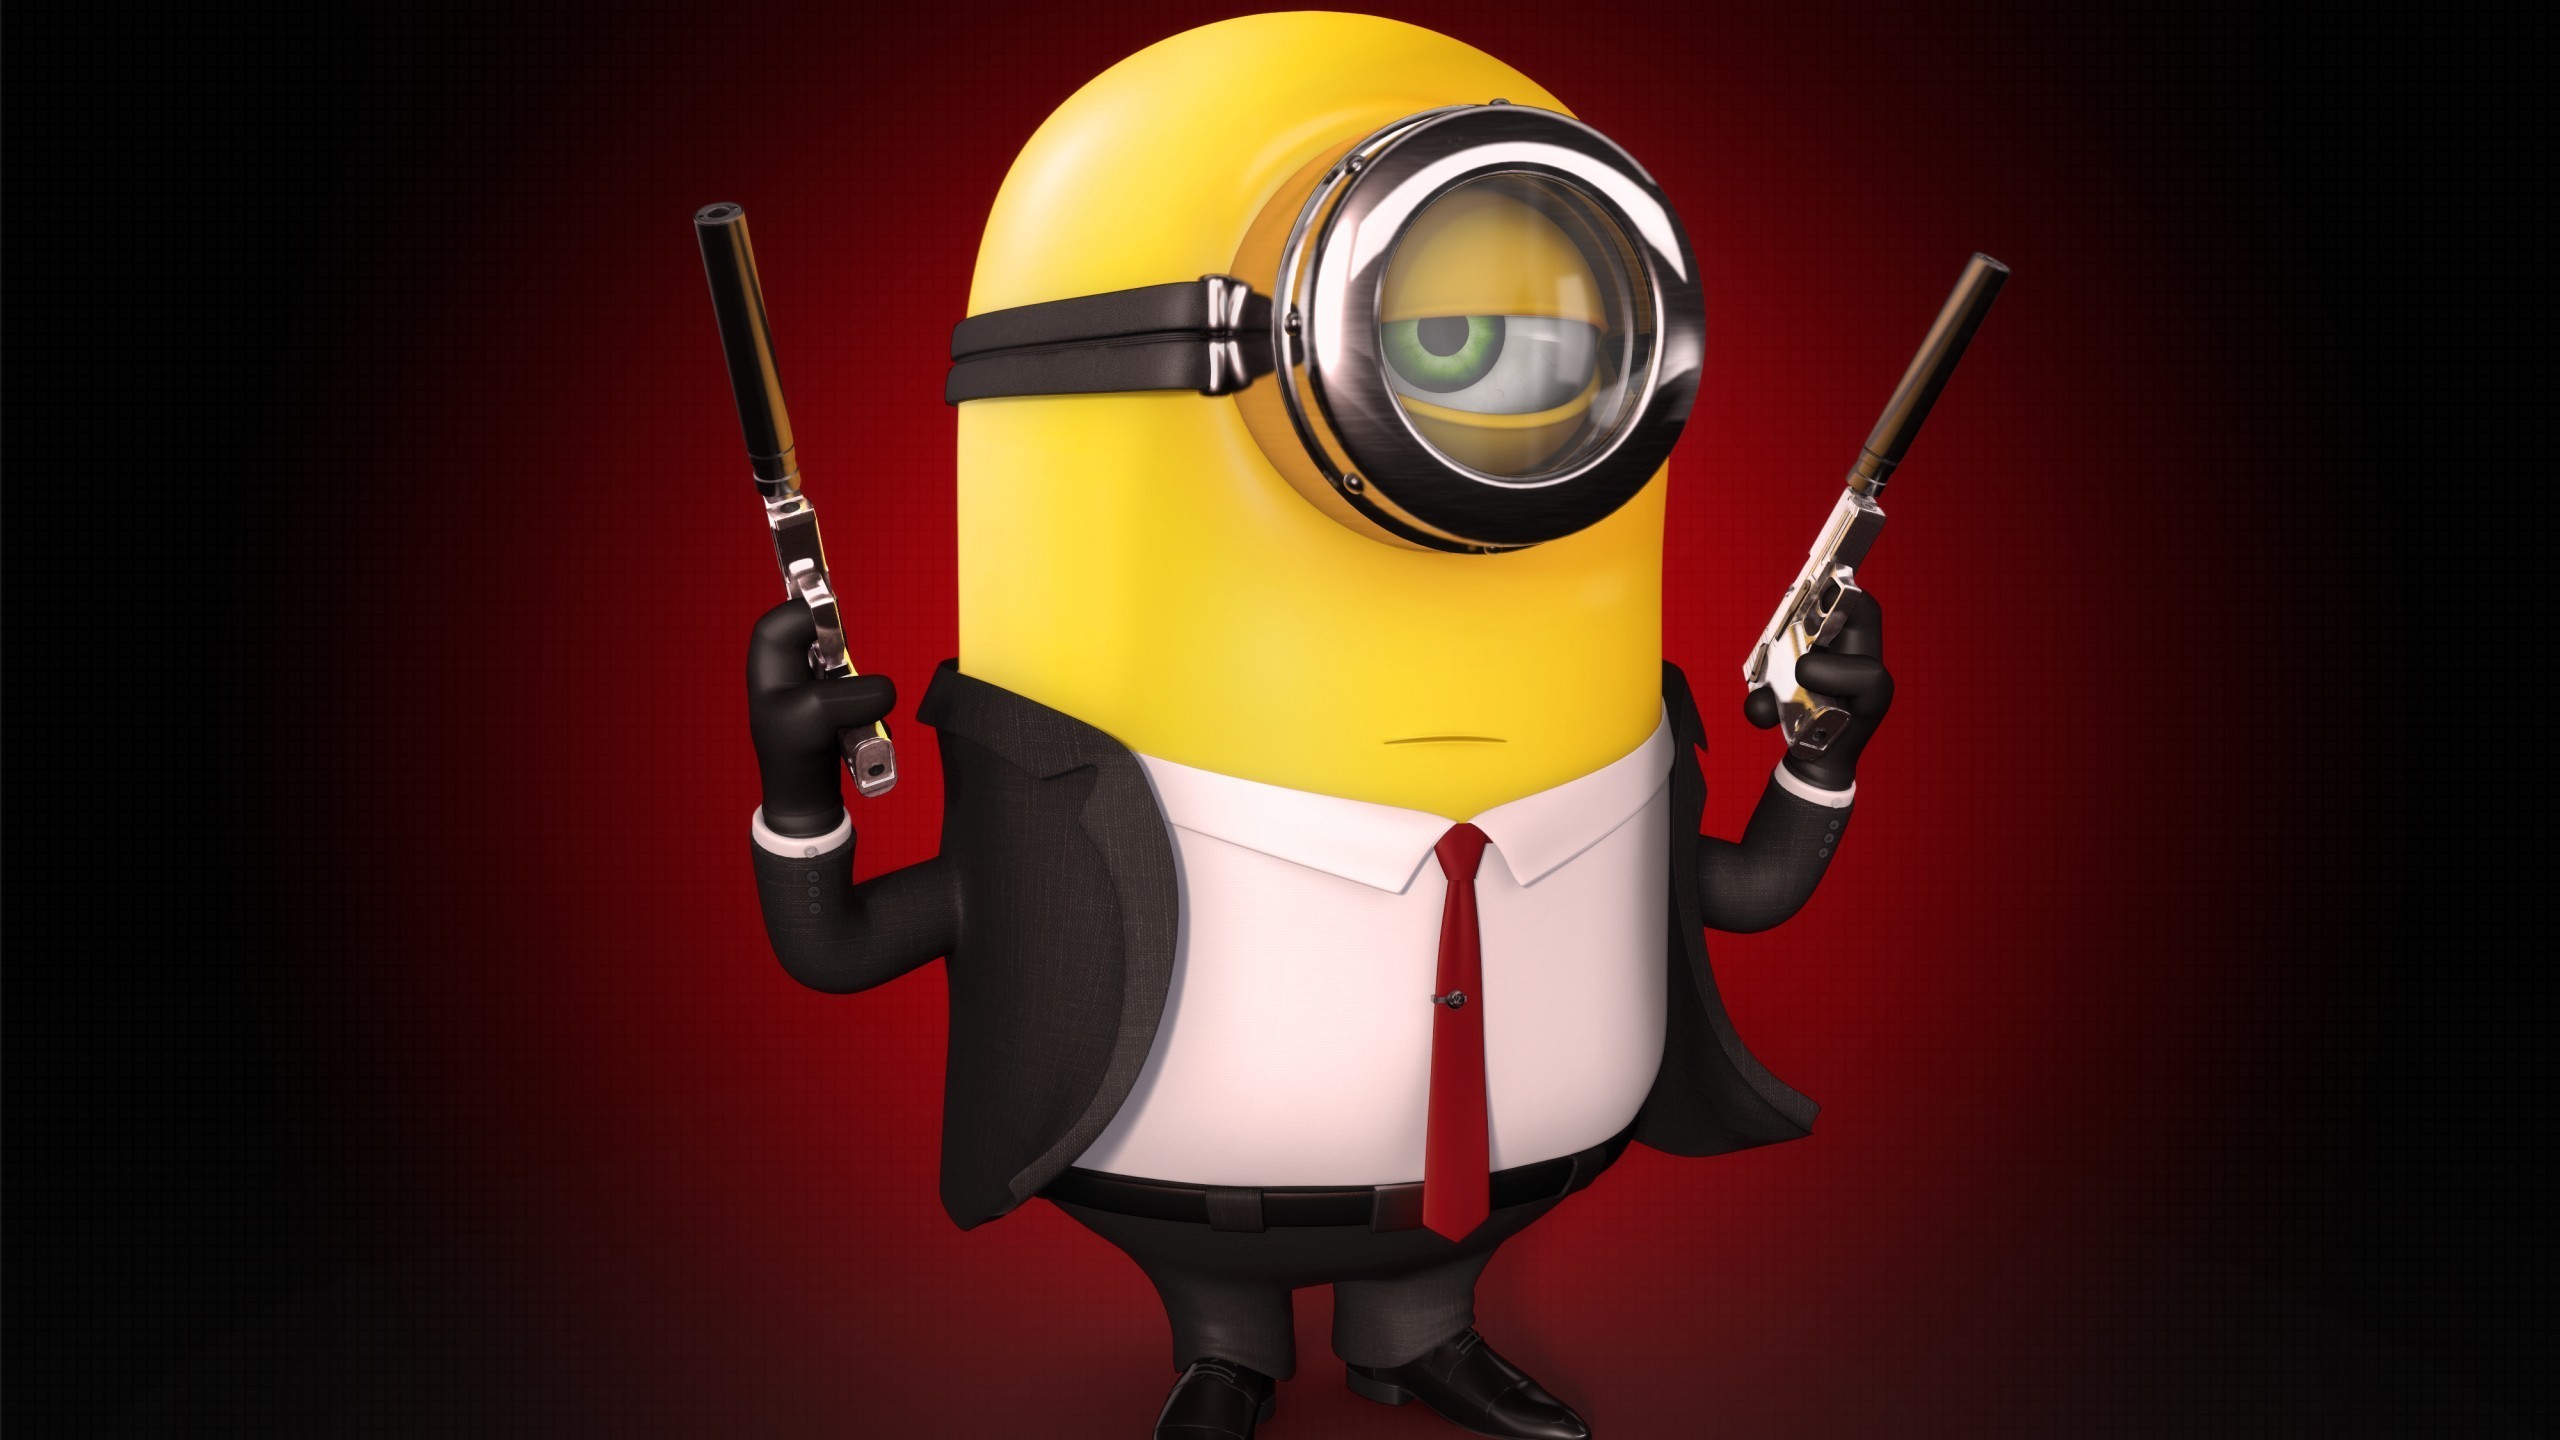 General 2560x1440 simple background gun red background humor minions Hitman dual wield movies movie characters video game characters Universal Pictures crossover